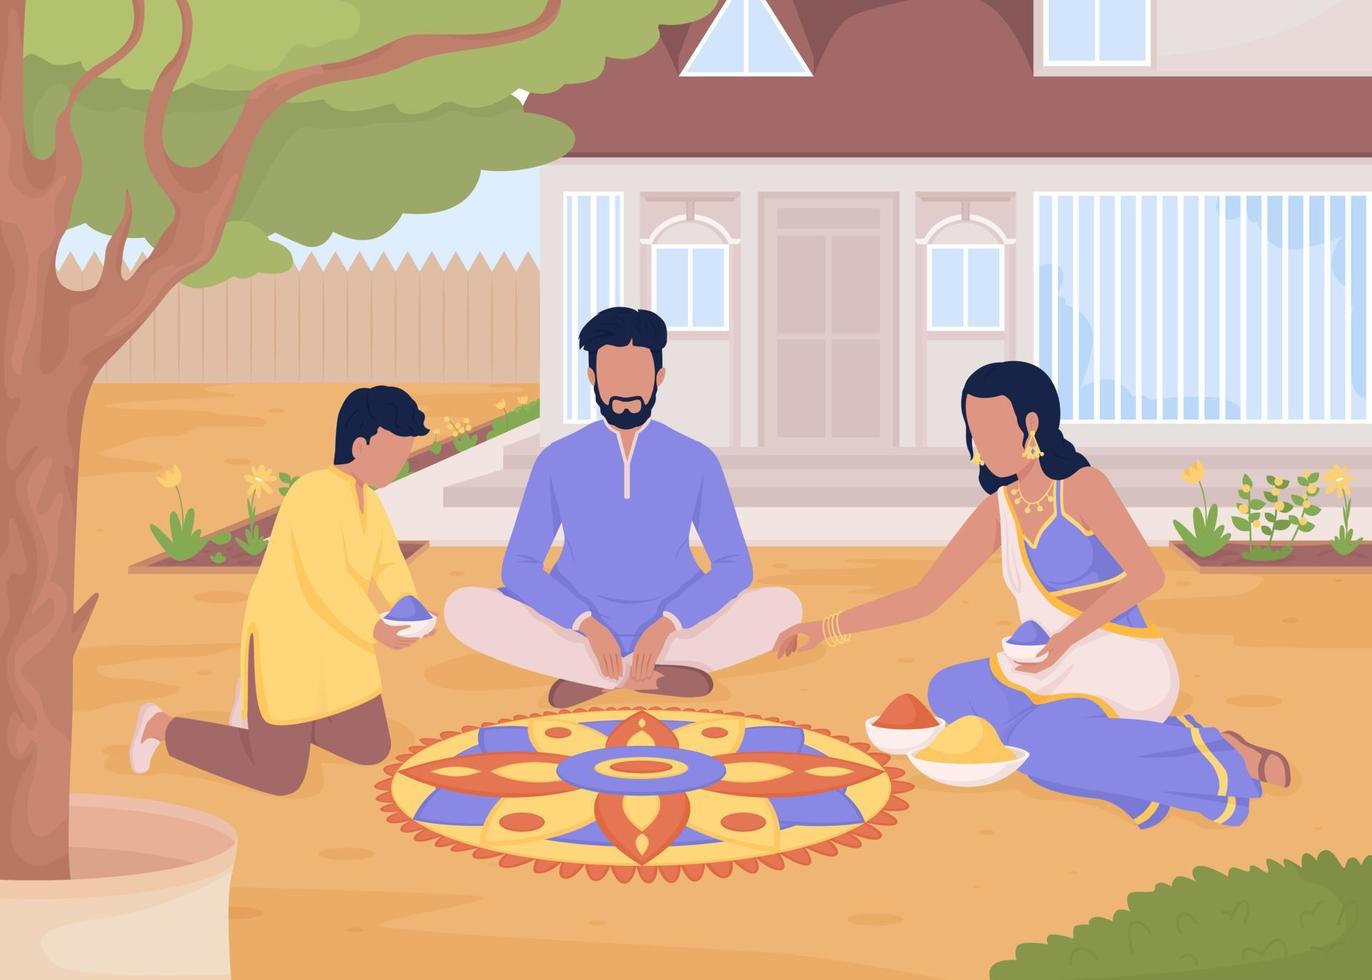 Creating flower rangoli with family flat color vector illustration. Traditional indian custom. Diwali festival preparation. Fully editable 2D simple cartoon characters with house on background